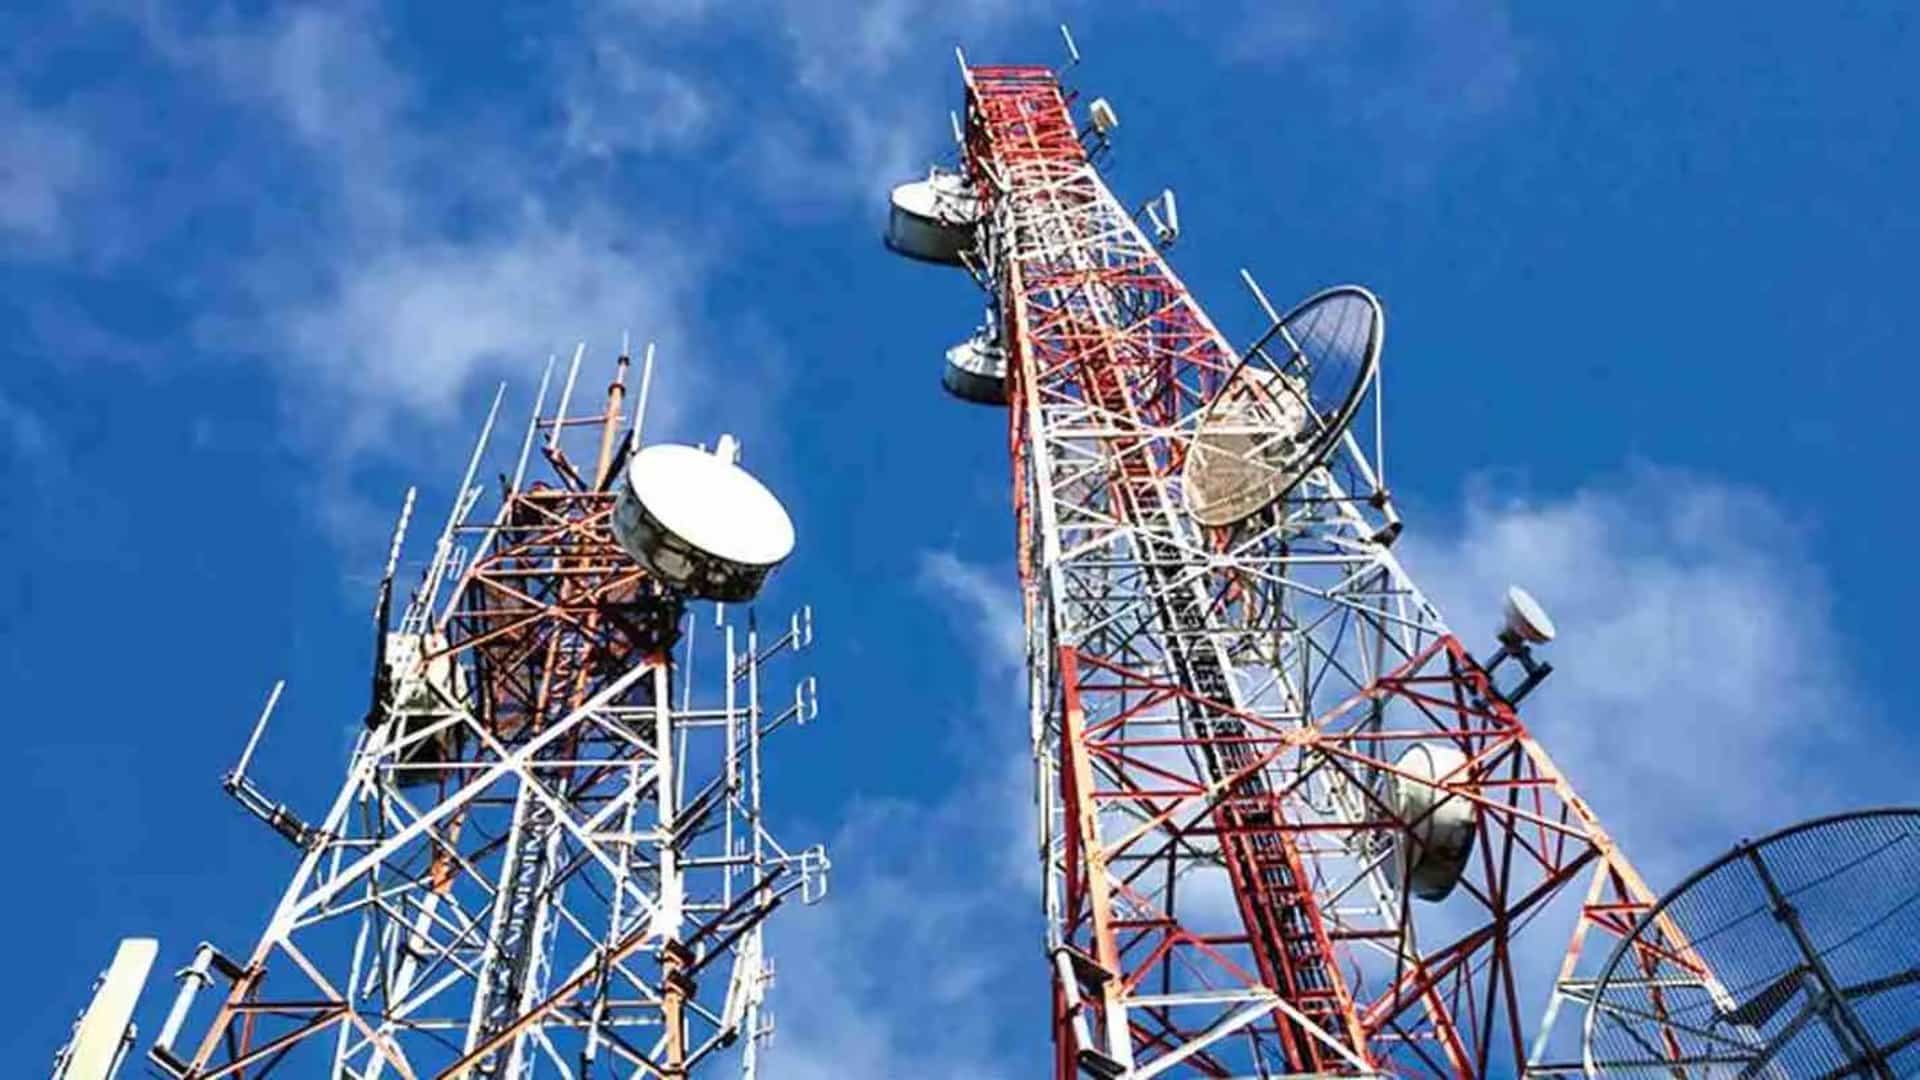 Telecom operators owe Rs 1.65 lakh cr to govt in AGR dues: Chauhan